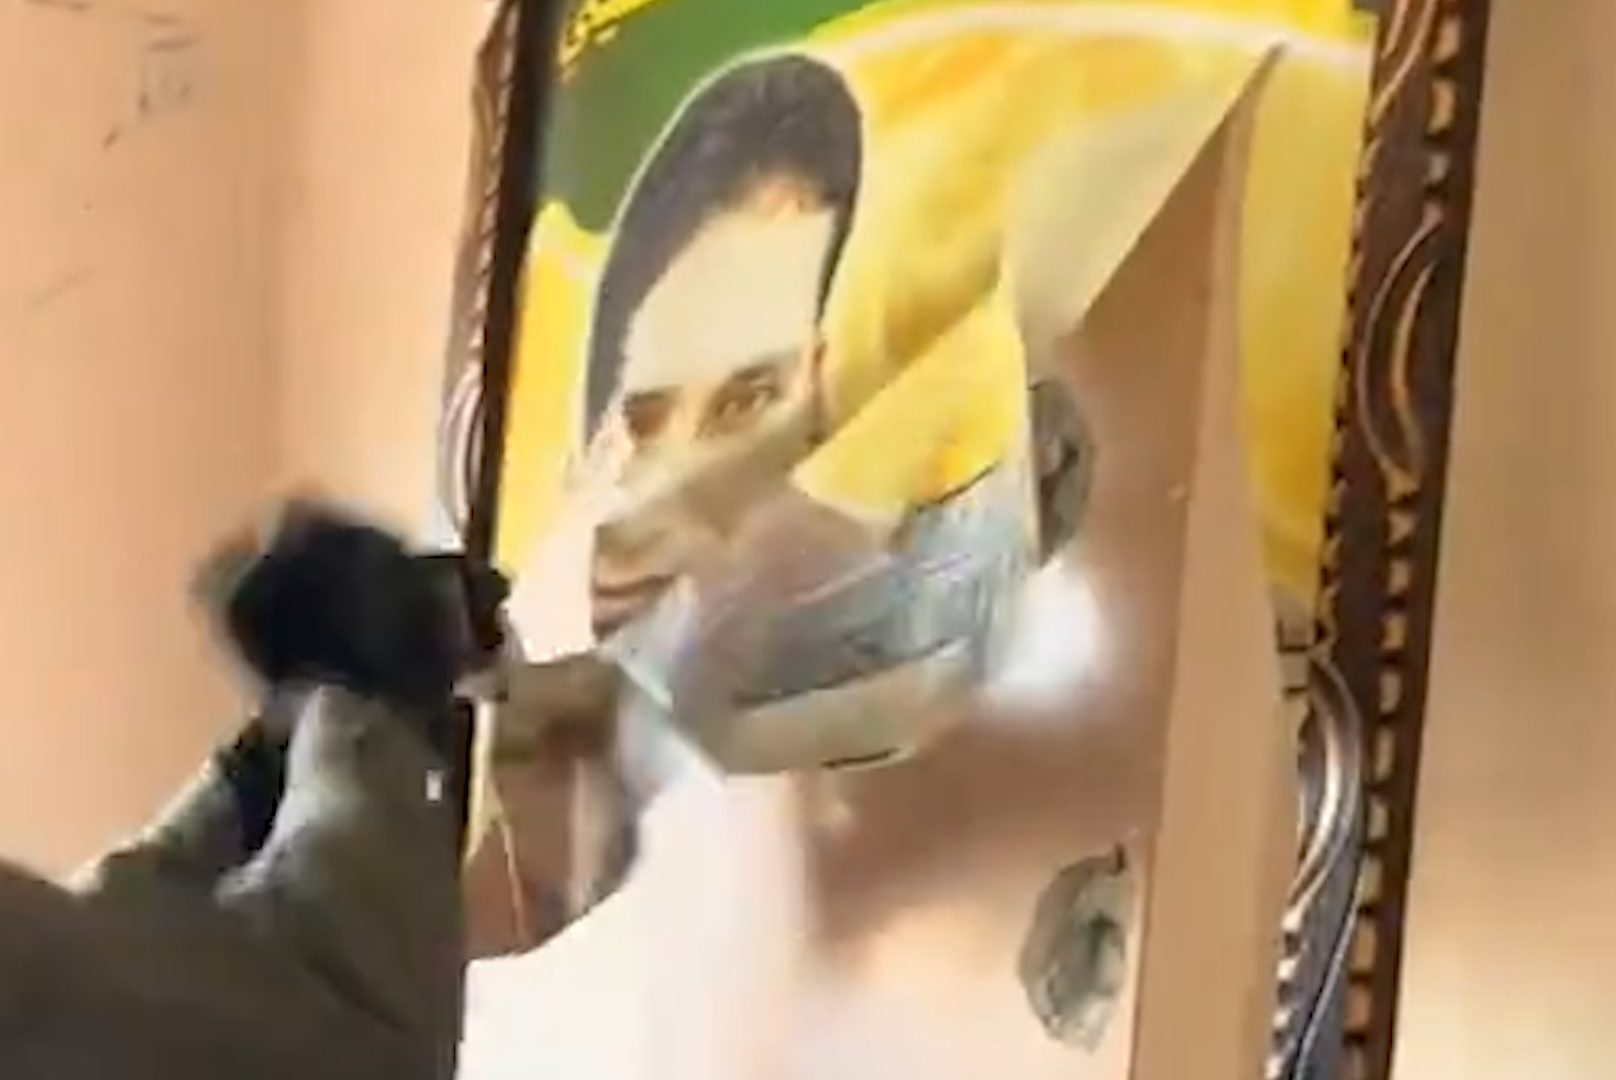 Israeli soldier cuts a memorial picture of a Palestinian journalist killed by Israel in 2014 from inside a home in Gaza